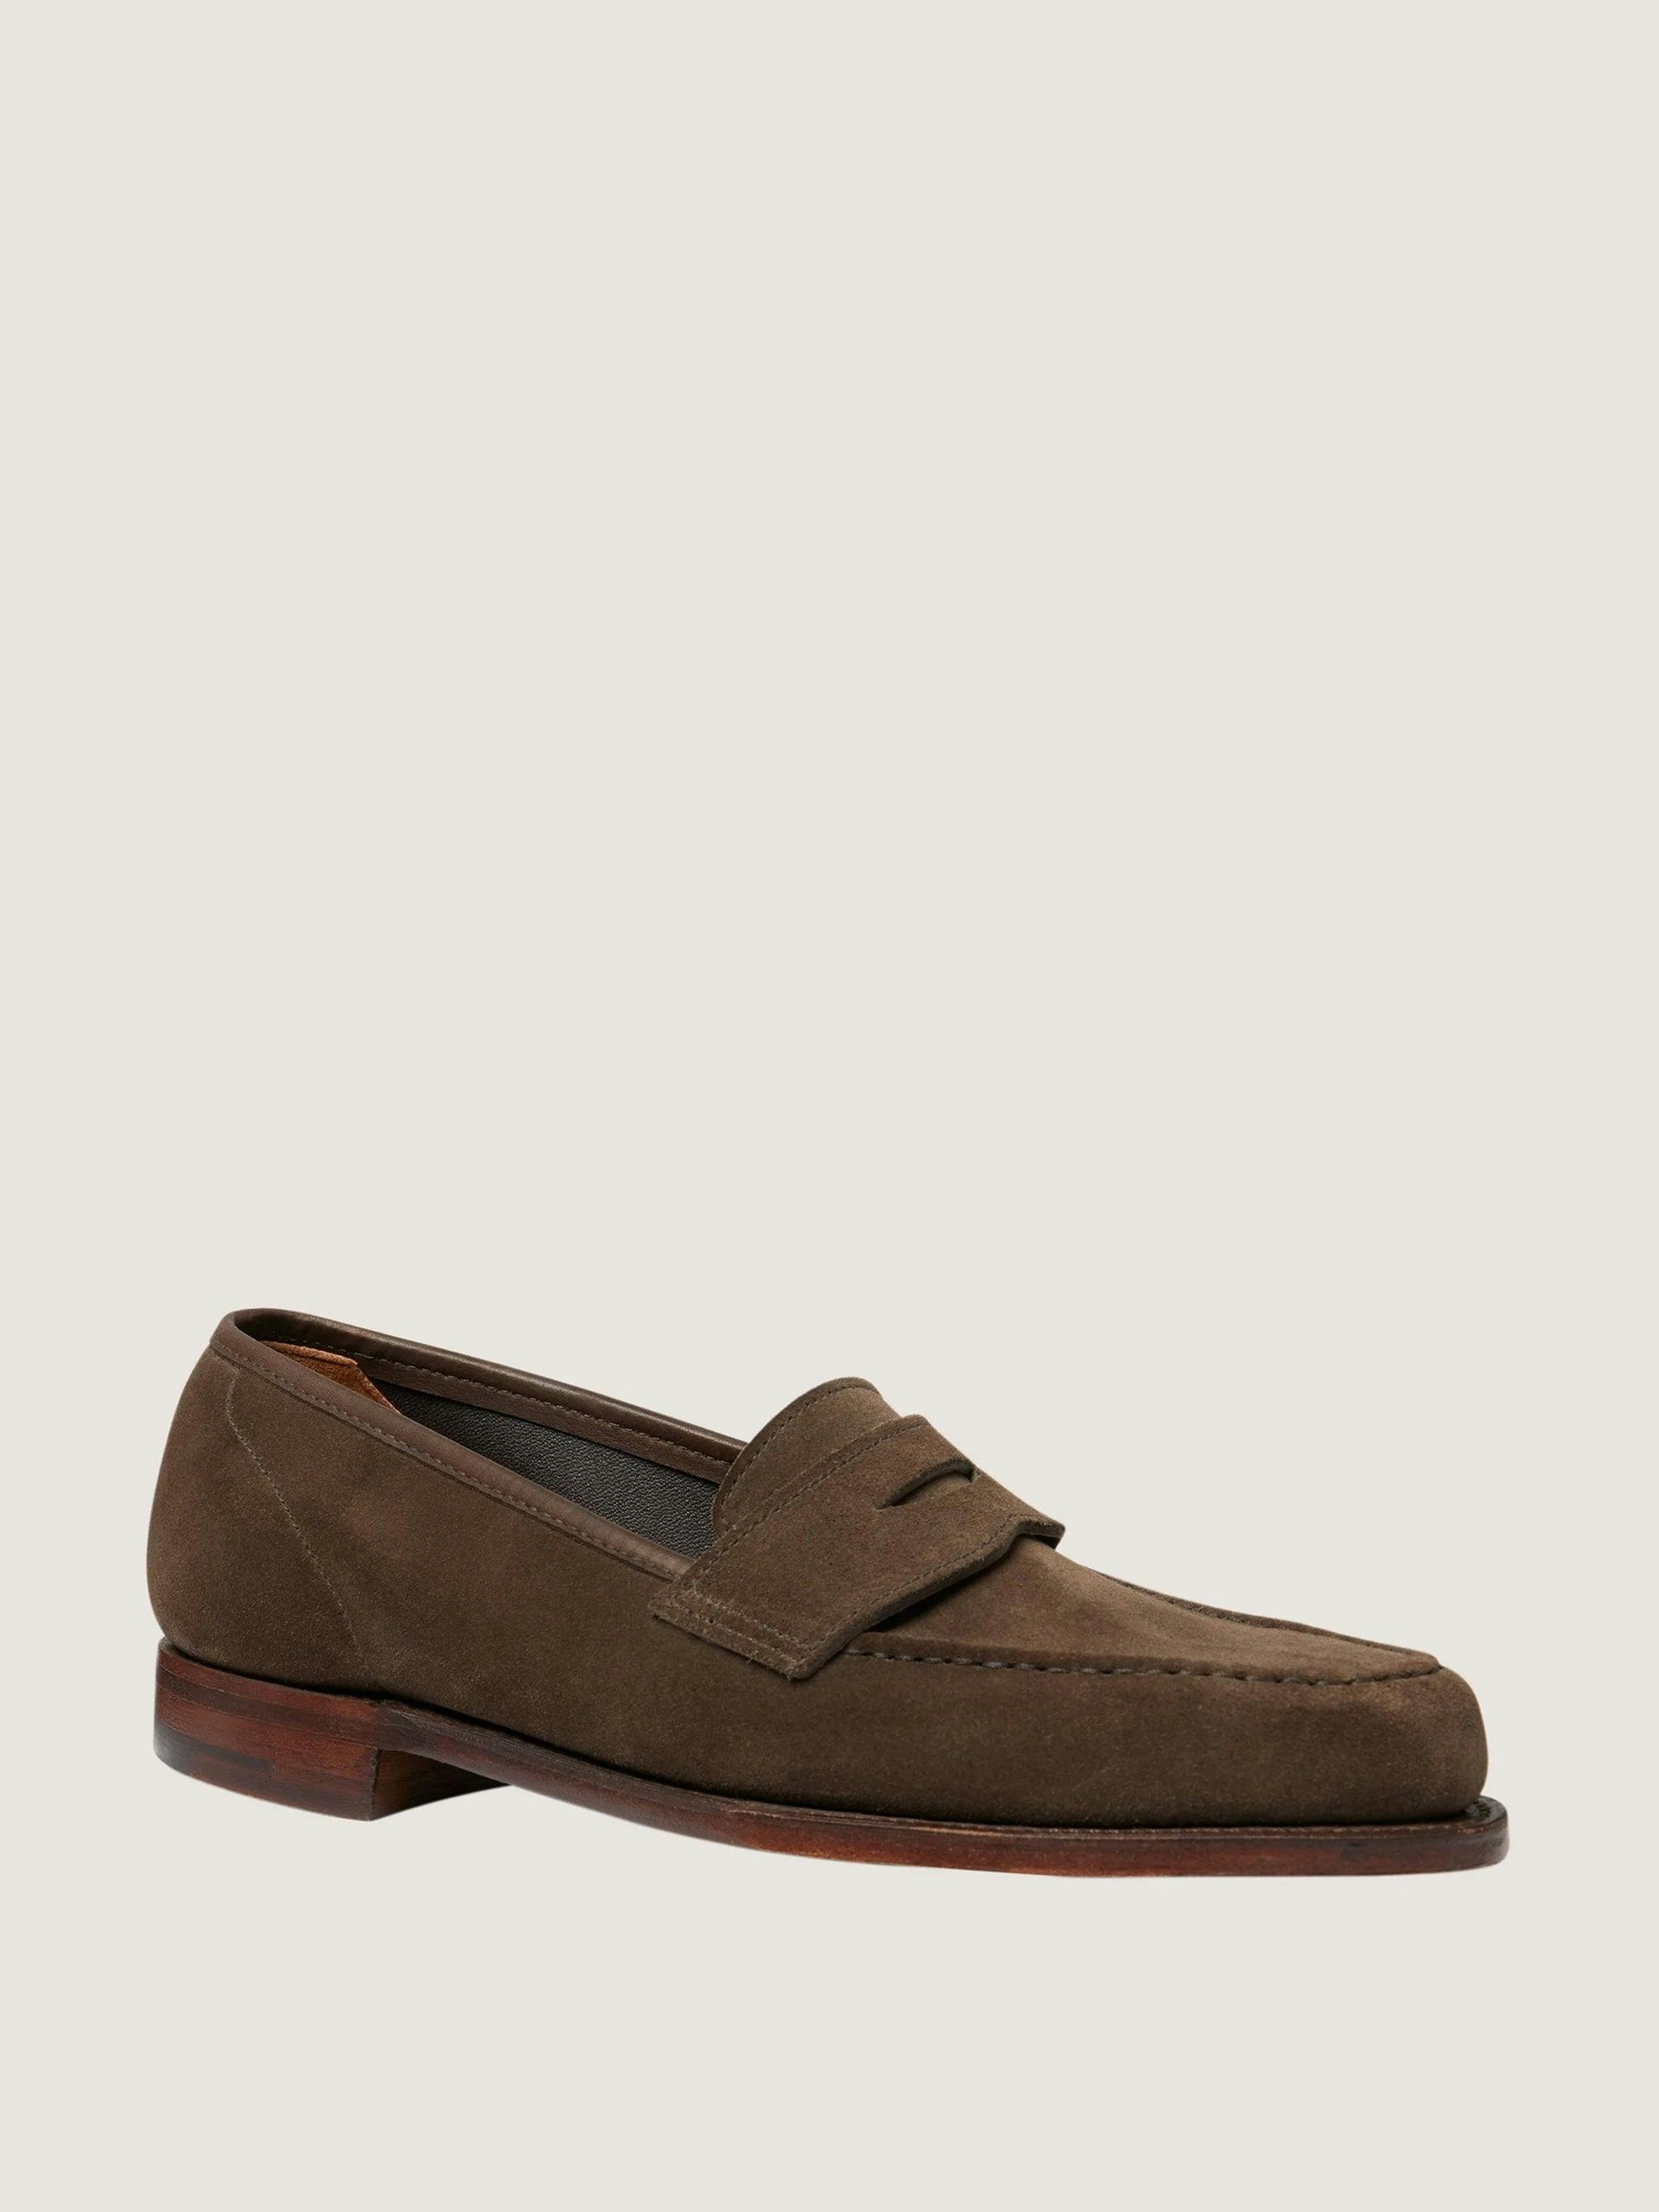 Unlined suede penny loafers